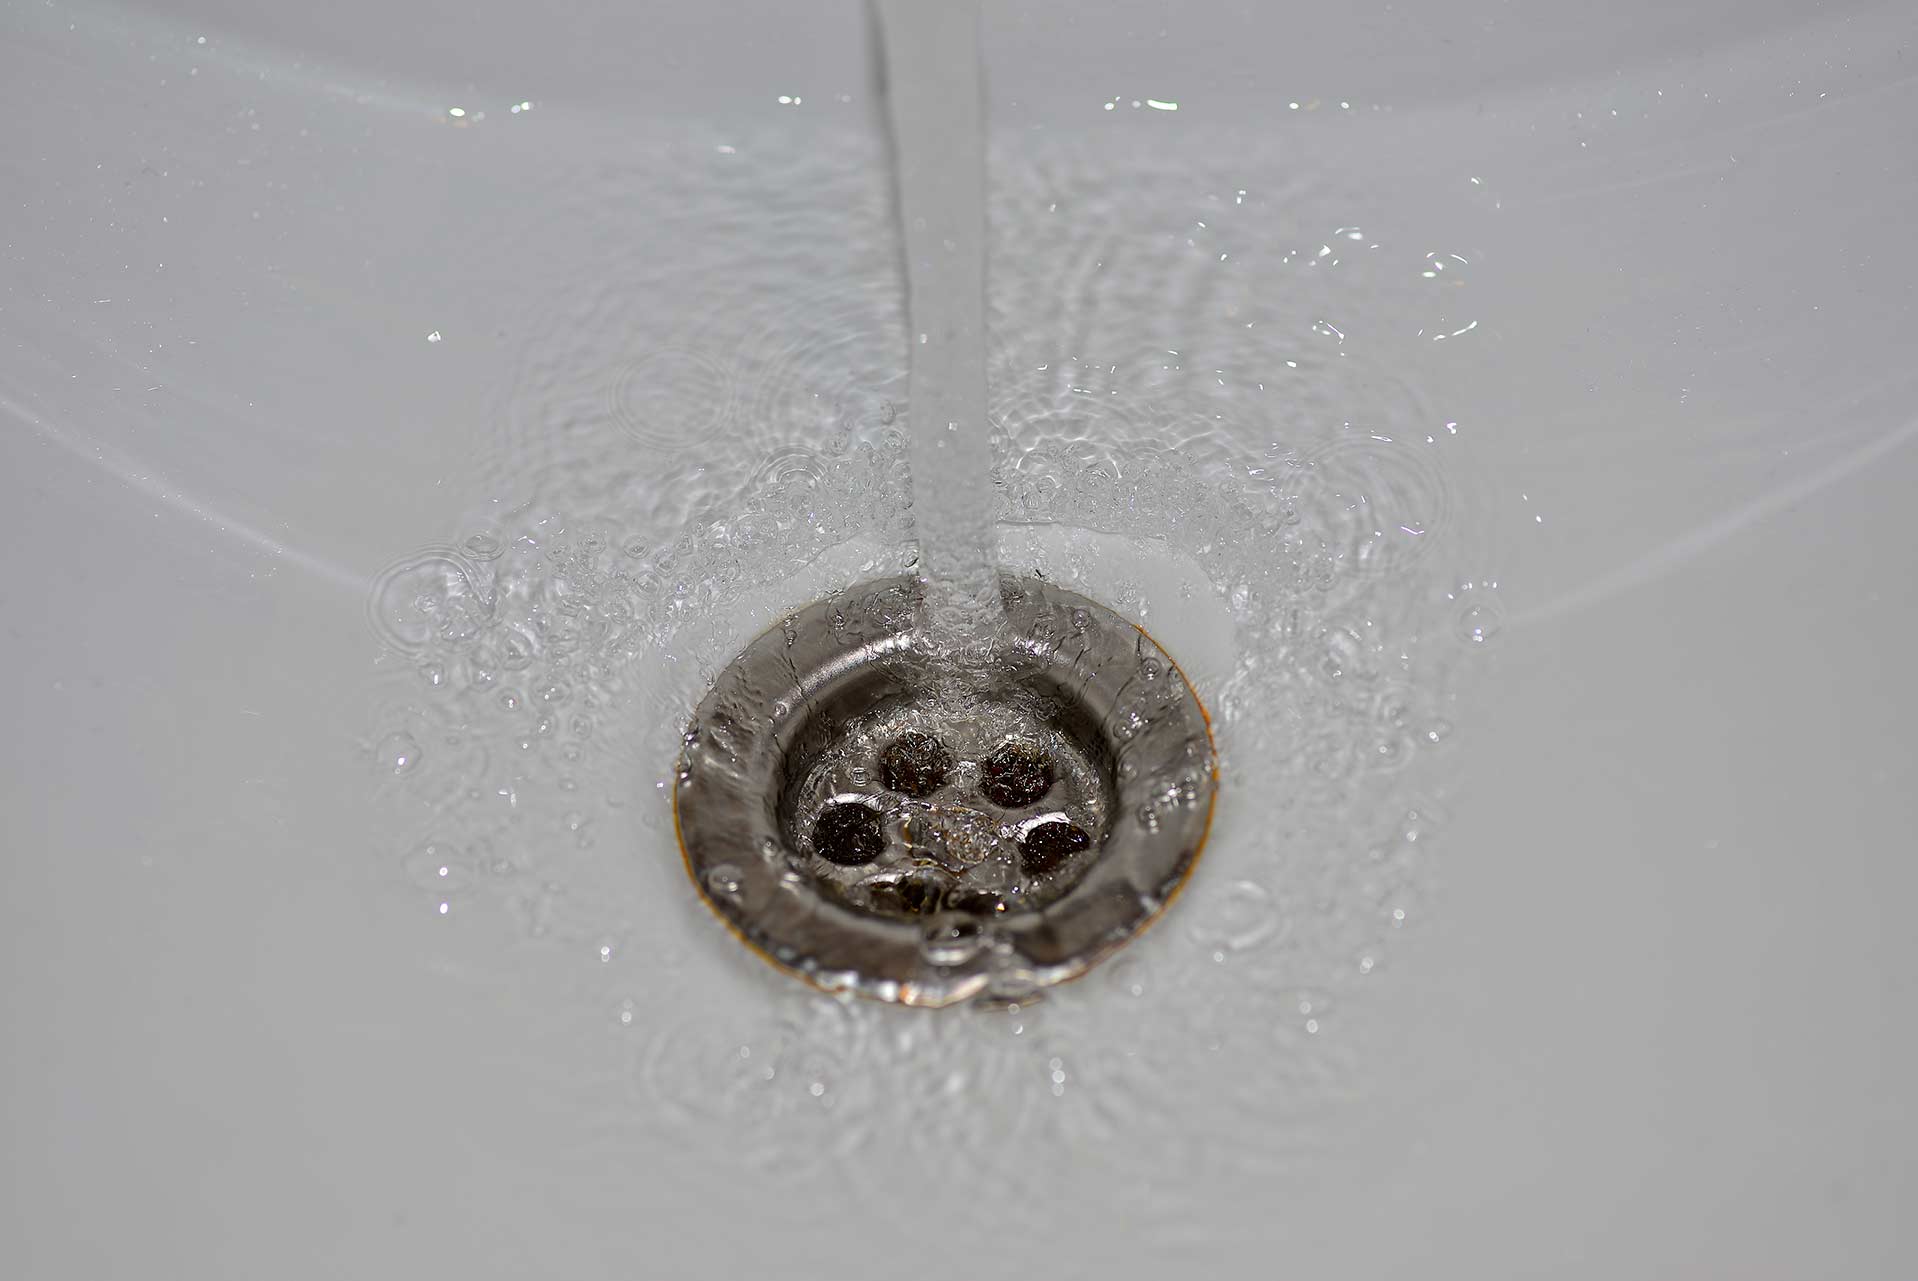 A2B Drains provides services to unblock blocked sinks and drains for properties in Stratford.